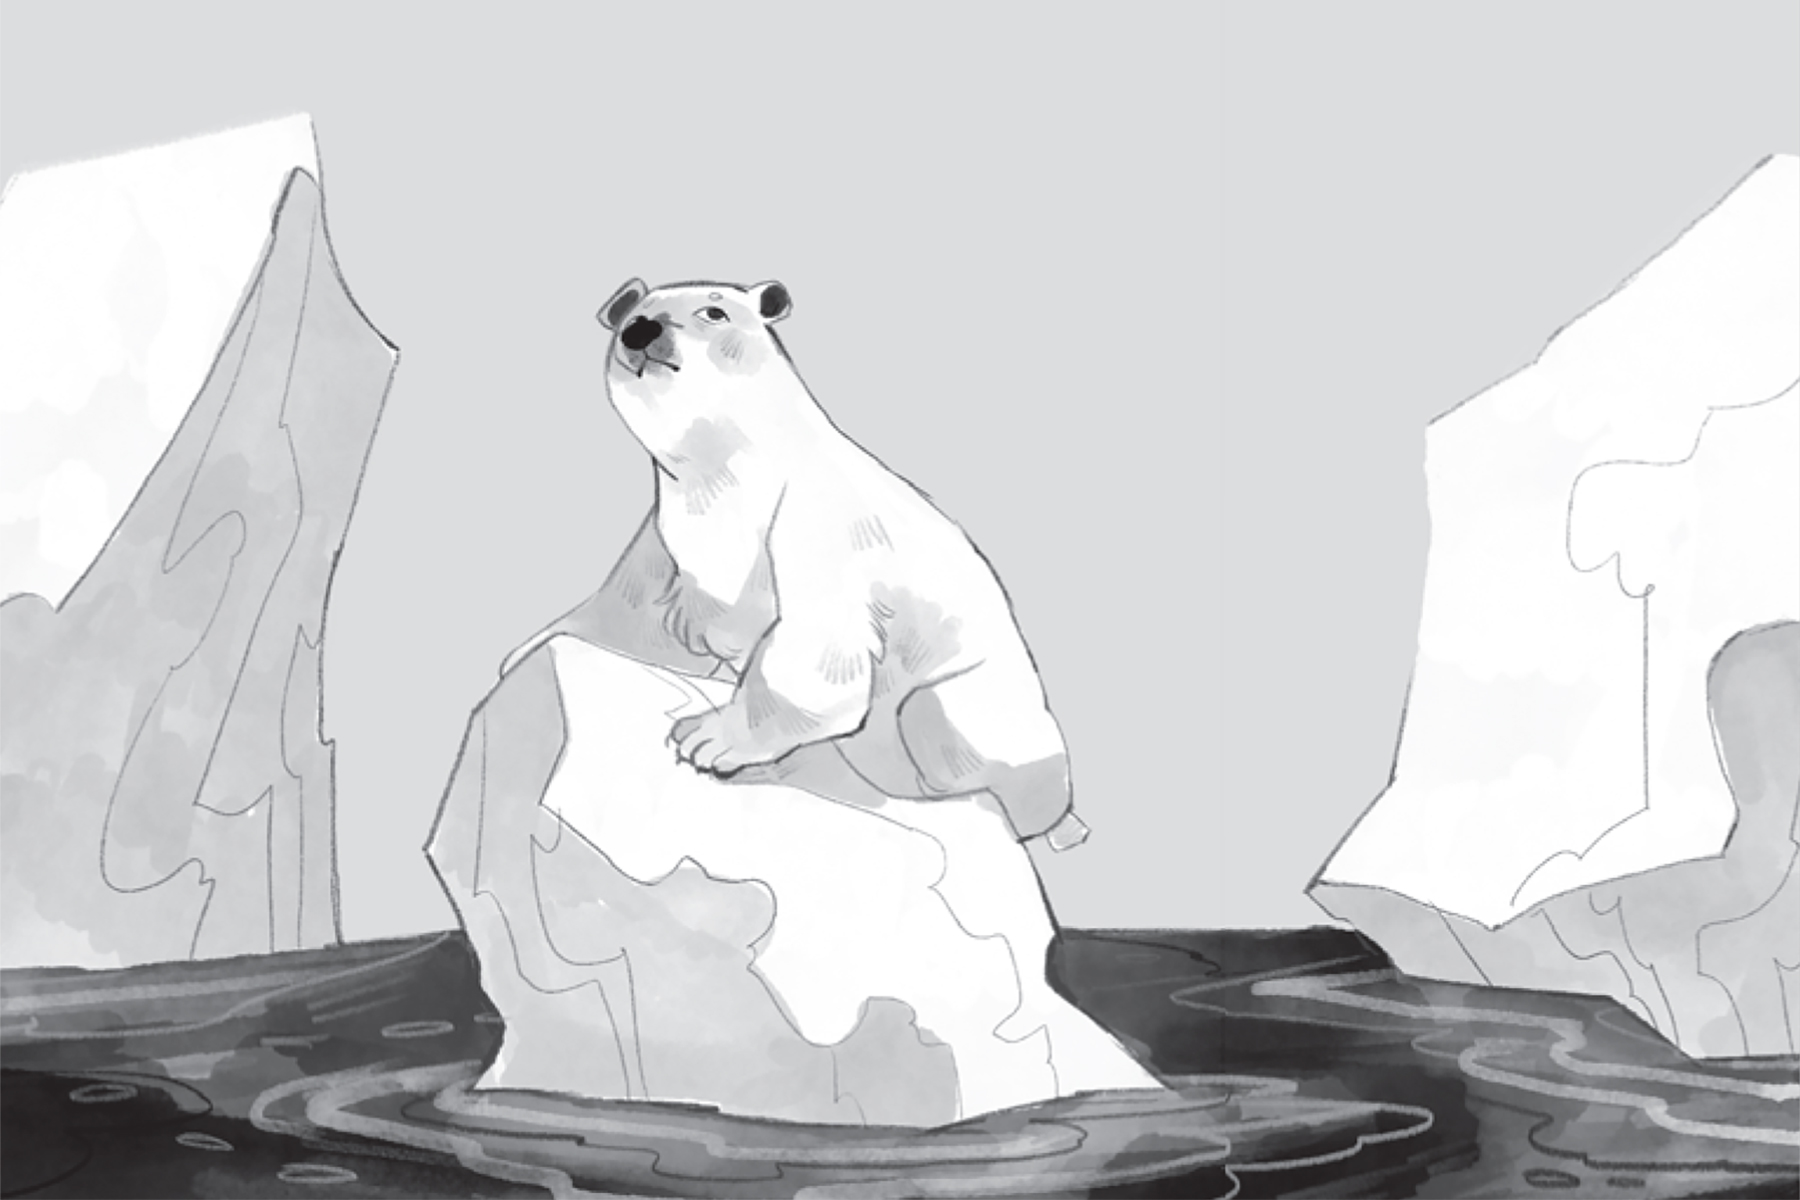 An illustration from Princess Olivia Investigates: The Wrong Weather showing a polar standing on a melting iceberg